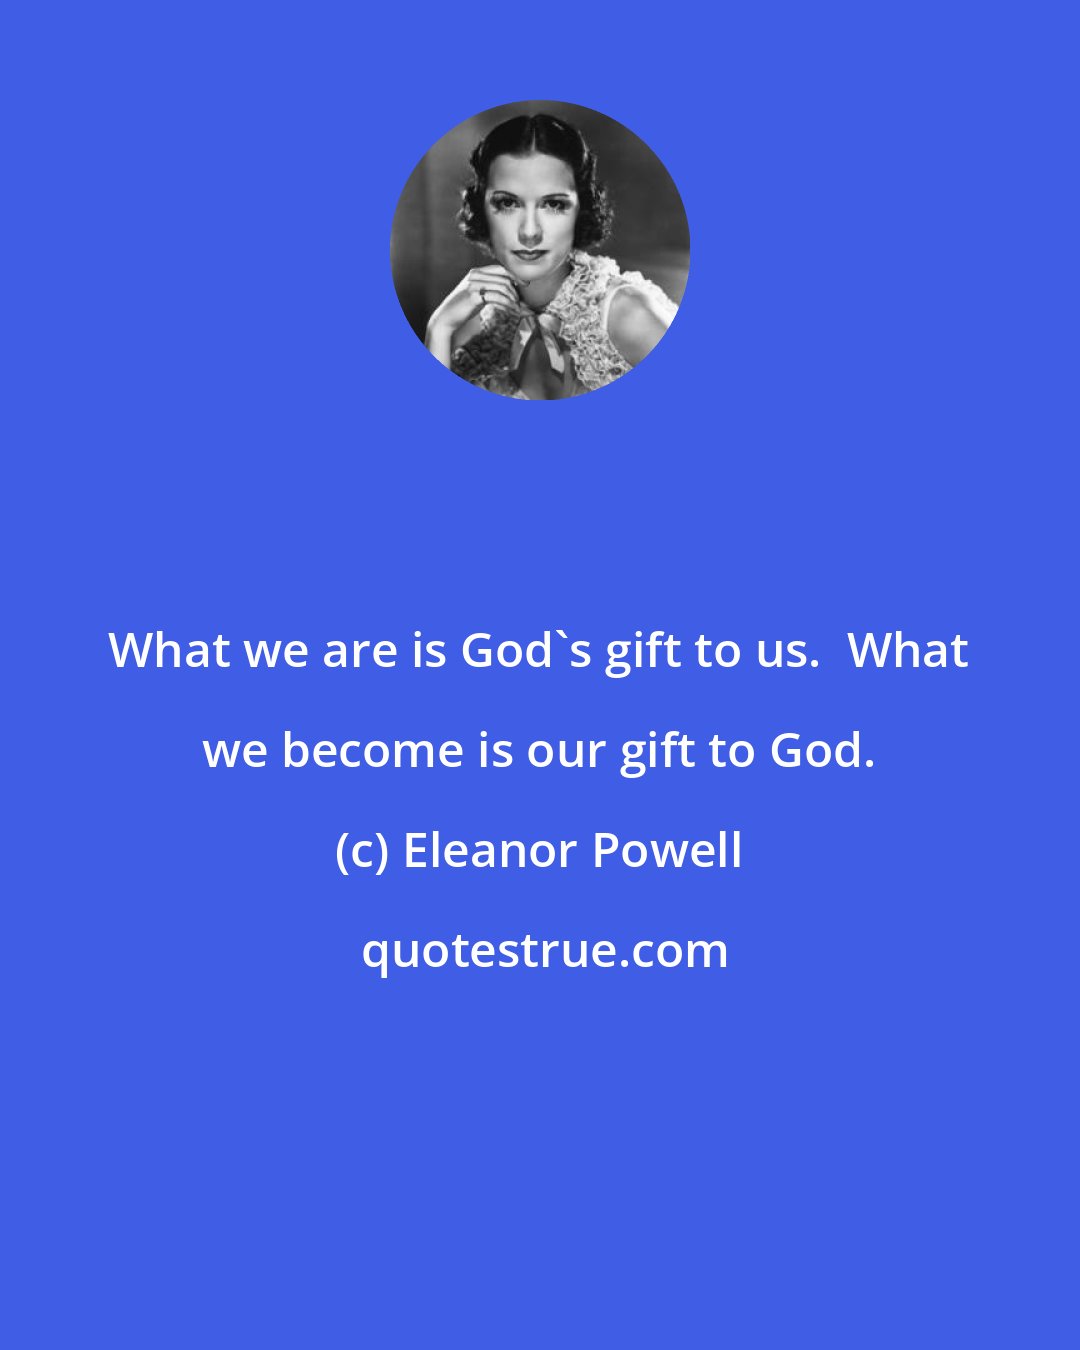 Eleanor Powell: What we are is God's gift to us.  What we become is our gift to God.